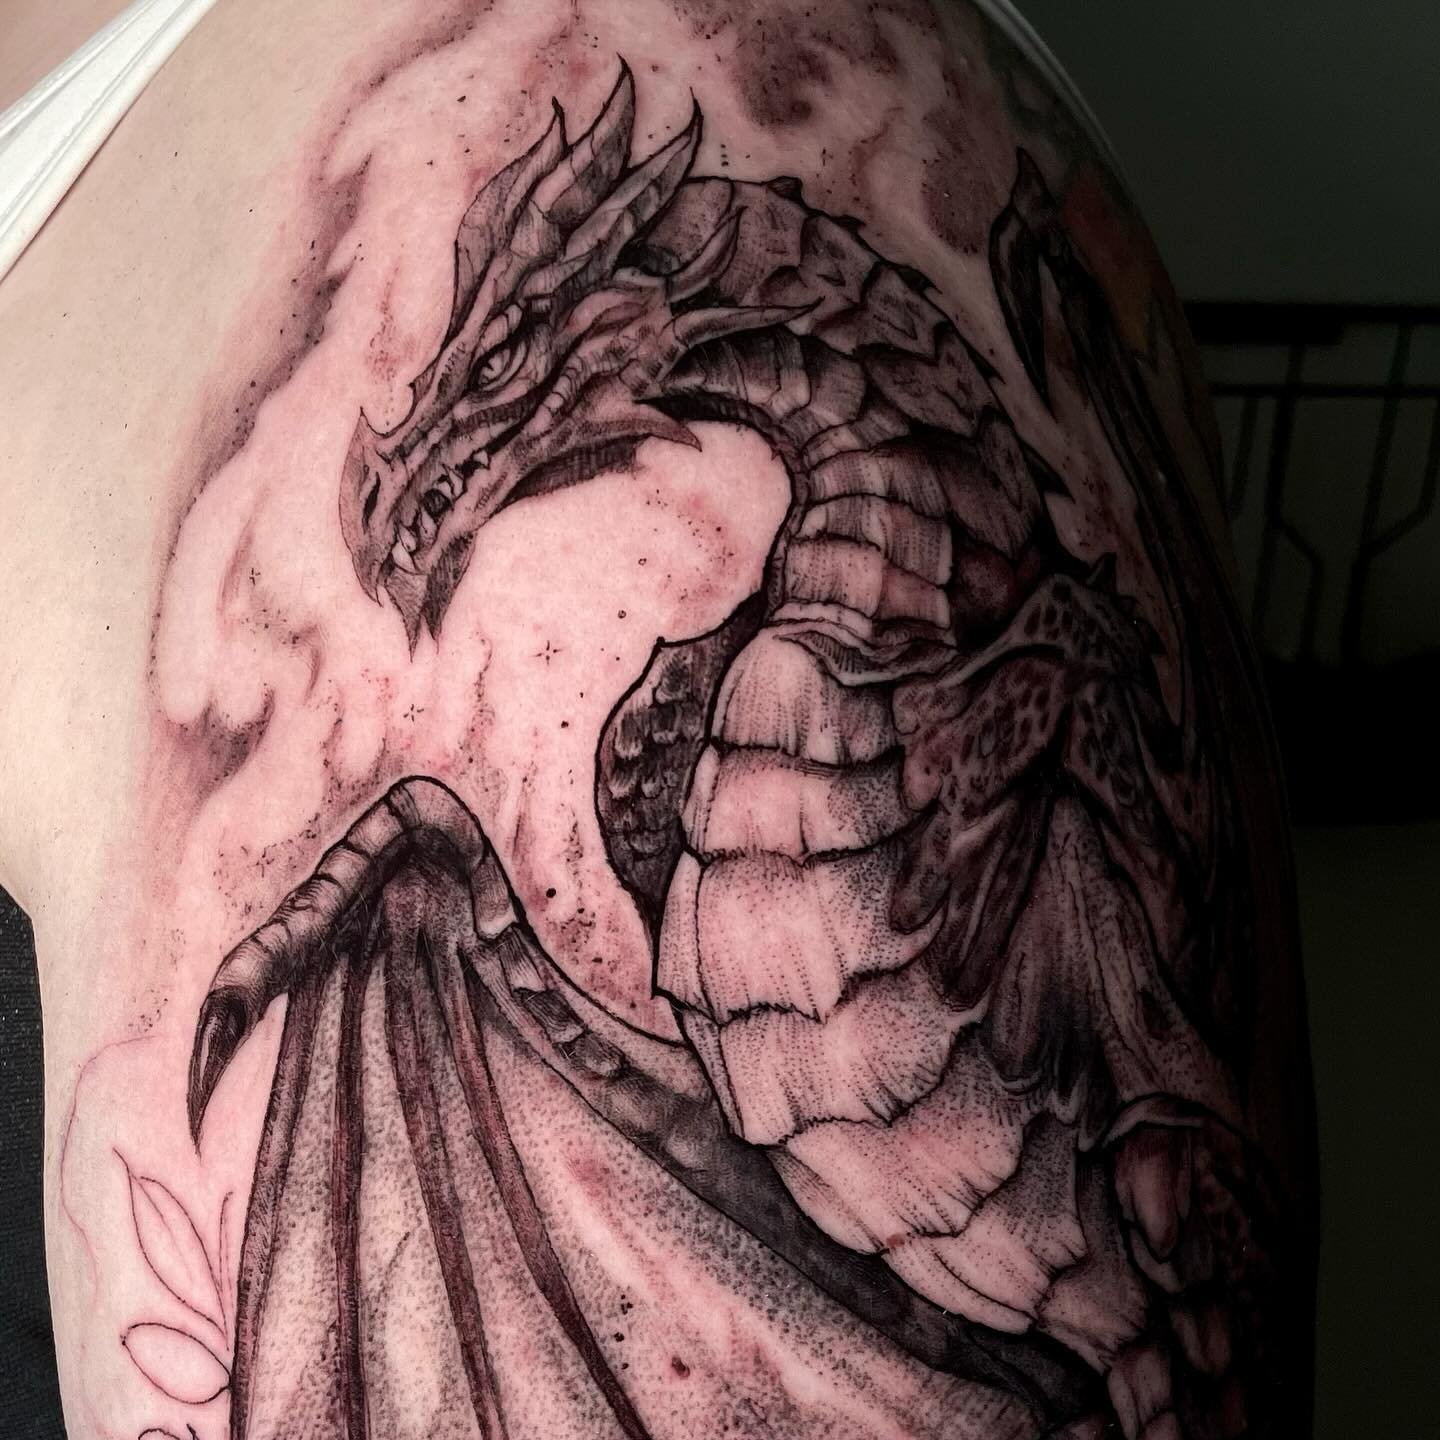 I hear carousals of unfinished work will make you engage more. So here&rsquo;s a dragon I&rsquo;m working on. This is 5 hours of work so far. Griffon asked me to design him a dragon from Skyrim with some Skyrim flora around it. I would love to have m